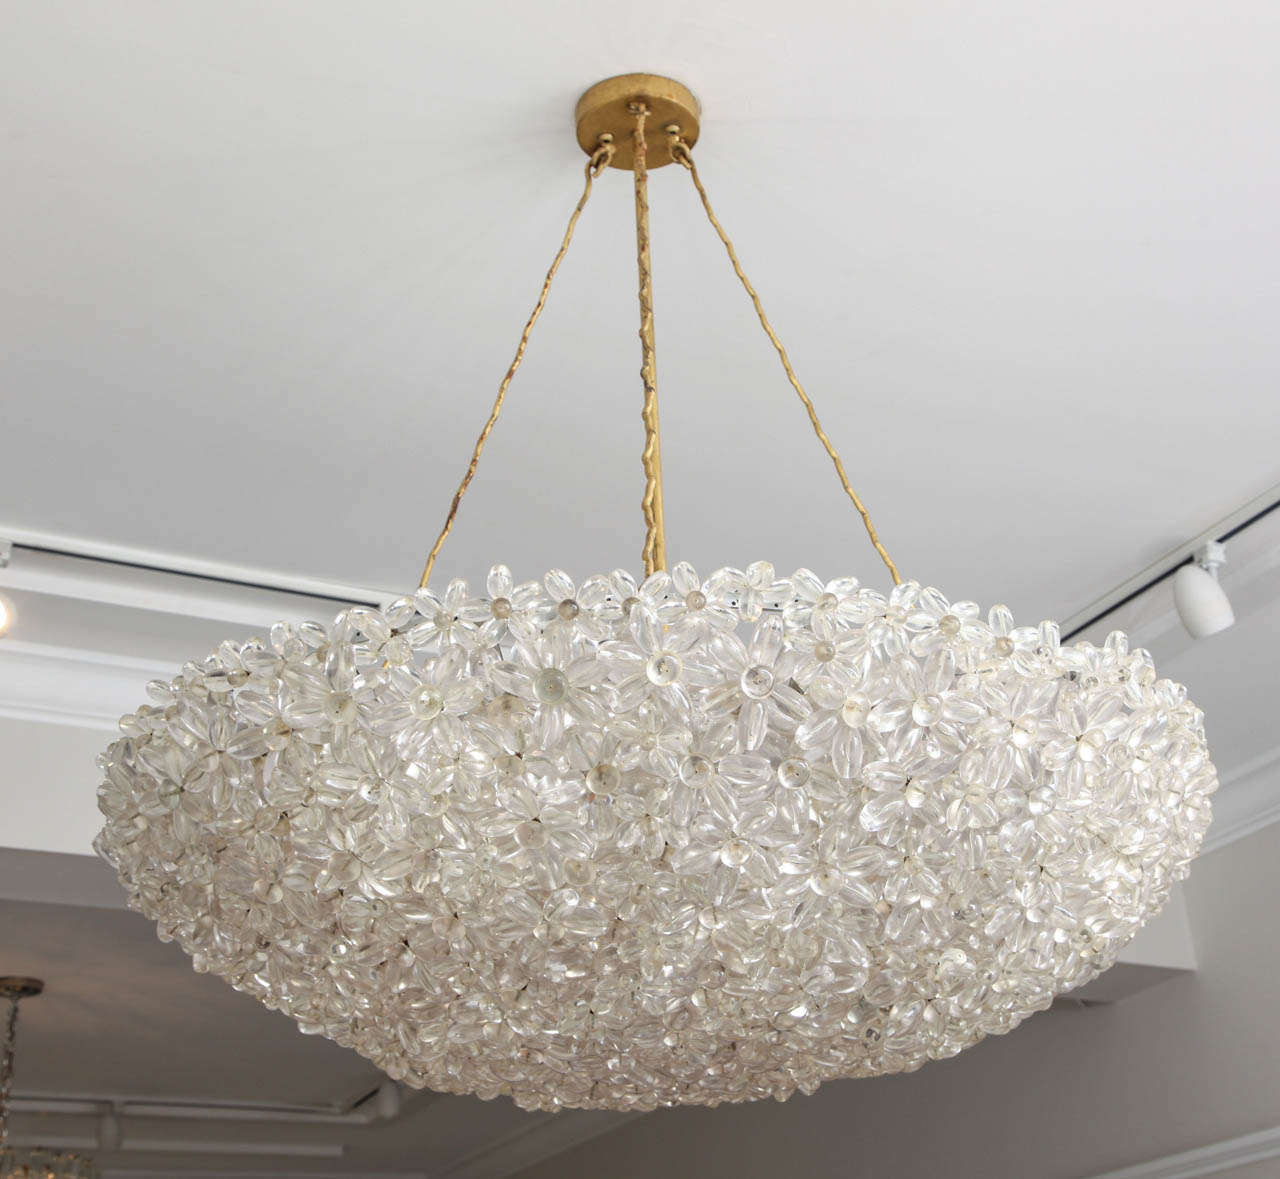 This stunning piece is made up of lucite daisies that are joined together, creating a lovely half-moon bouquet with light passing through it.  The piece is hung from three 